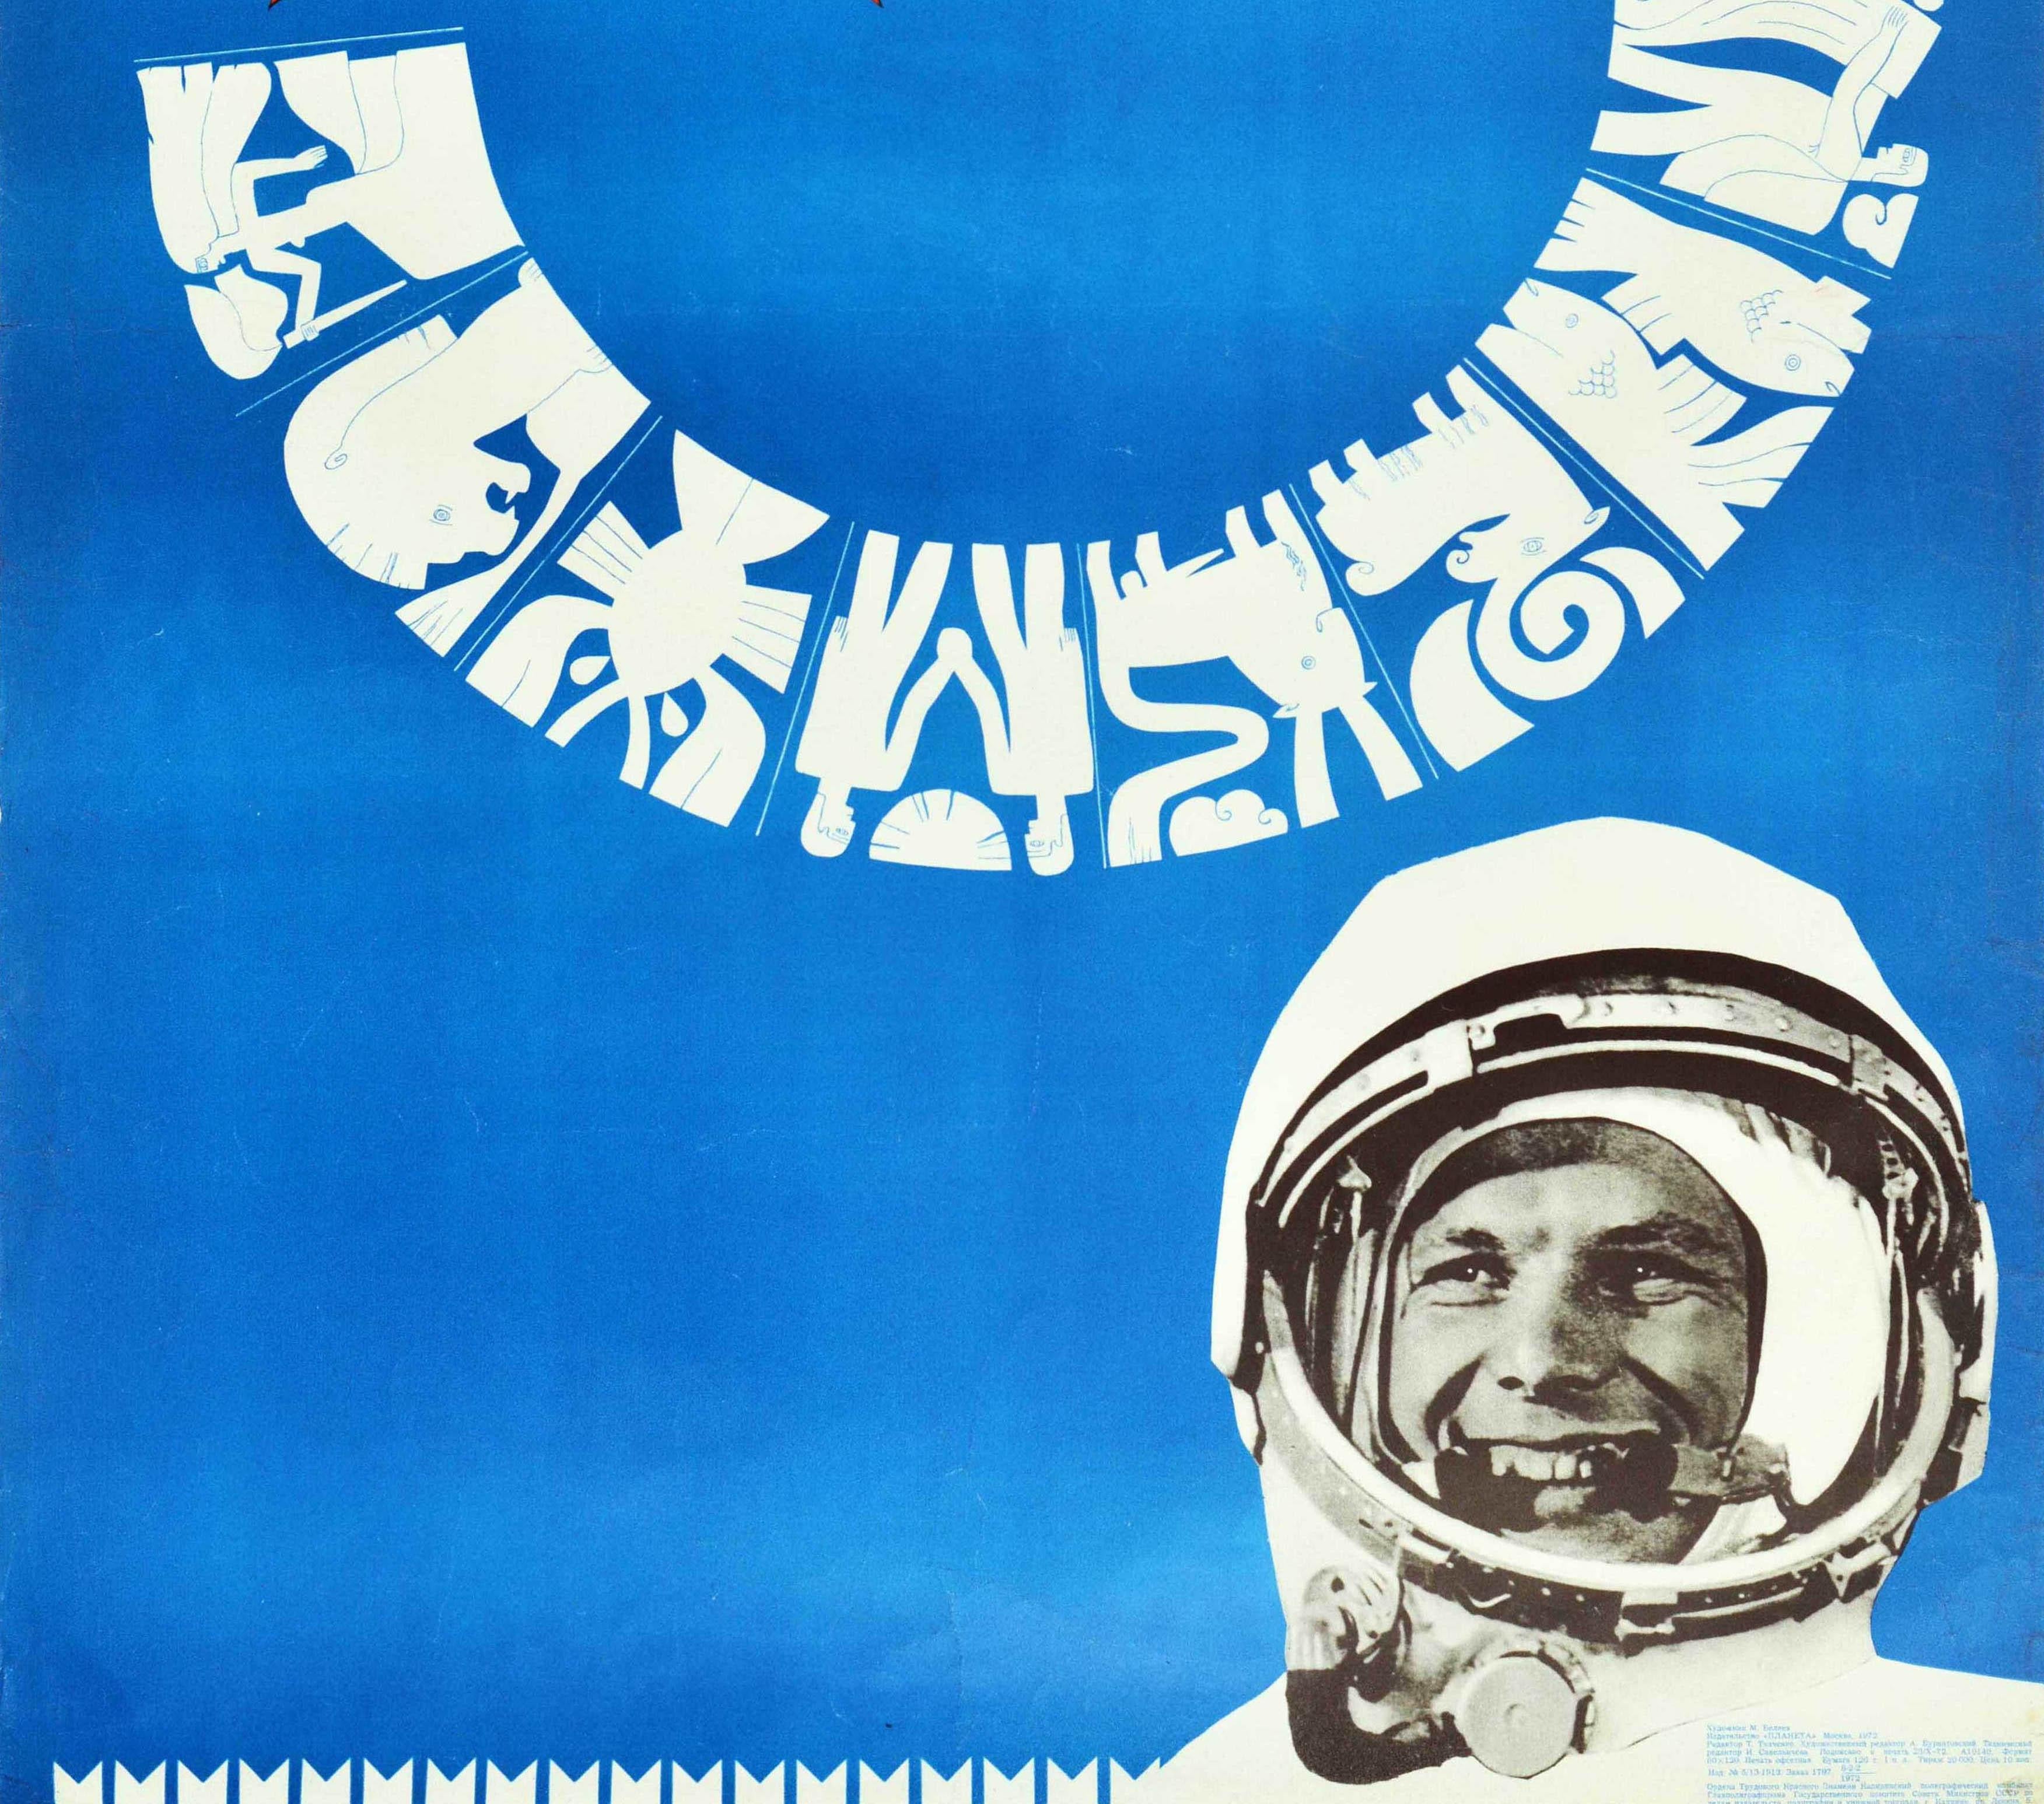 Original vintage Soviet propaganda poster - And there will be a new constellation - featuring an illustration of a red USSR star on the blue background with horoscope constellations as block white Zodiac signs and a photograph of the Russian